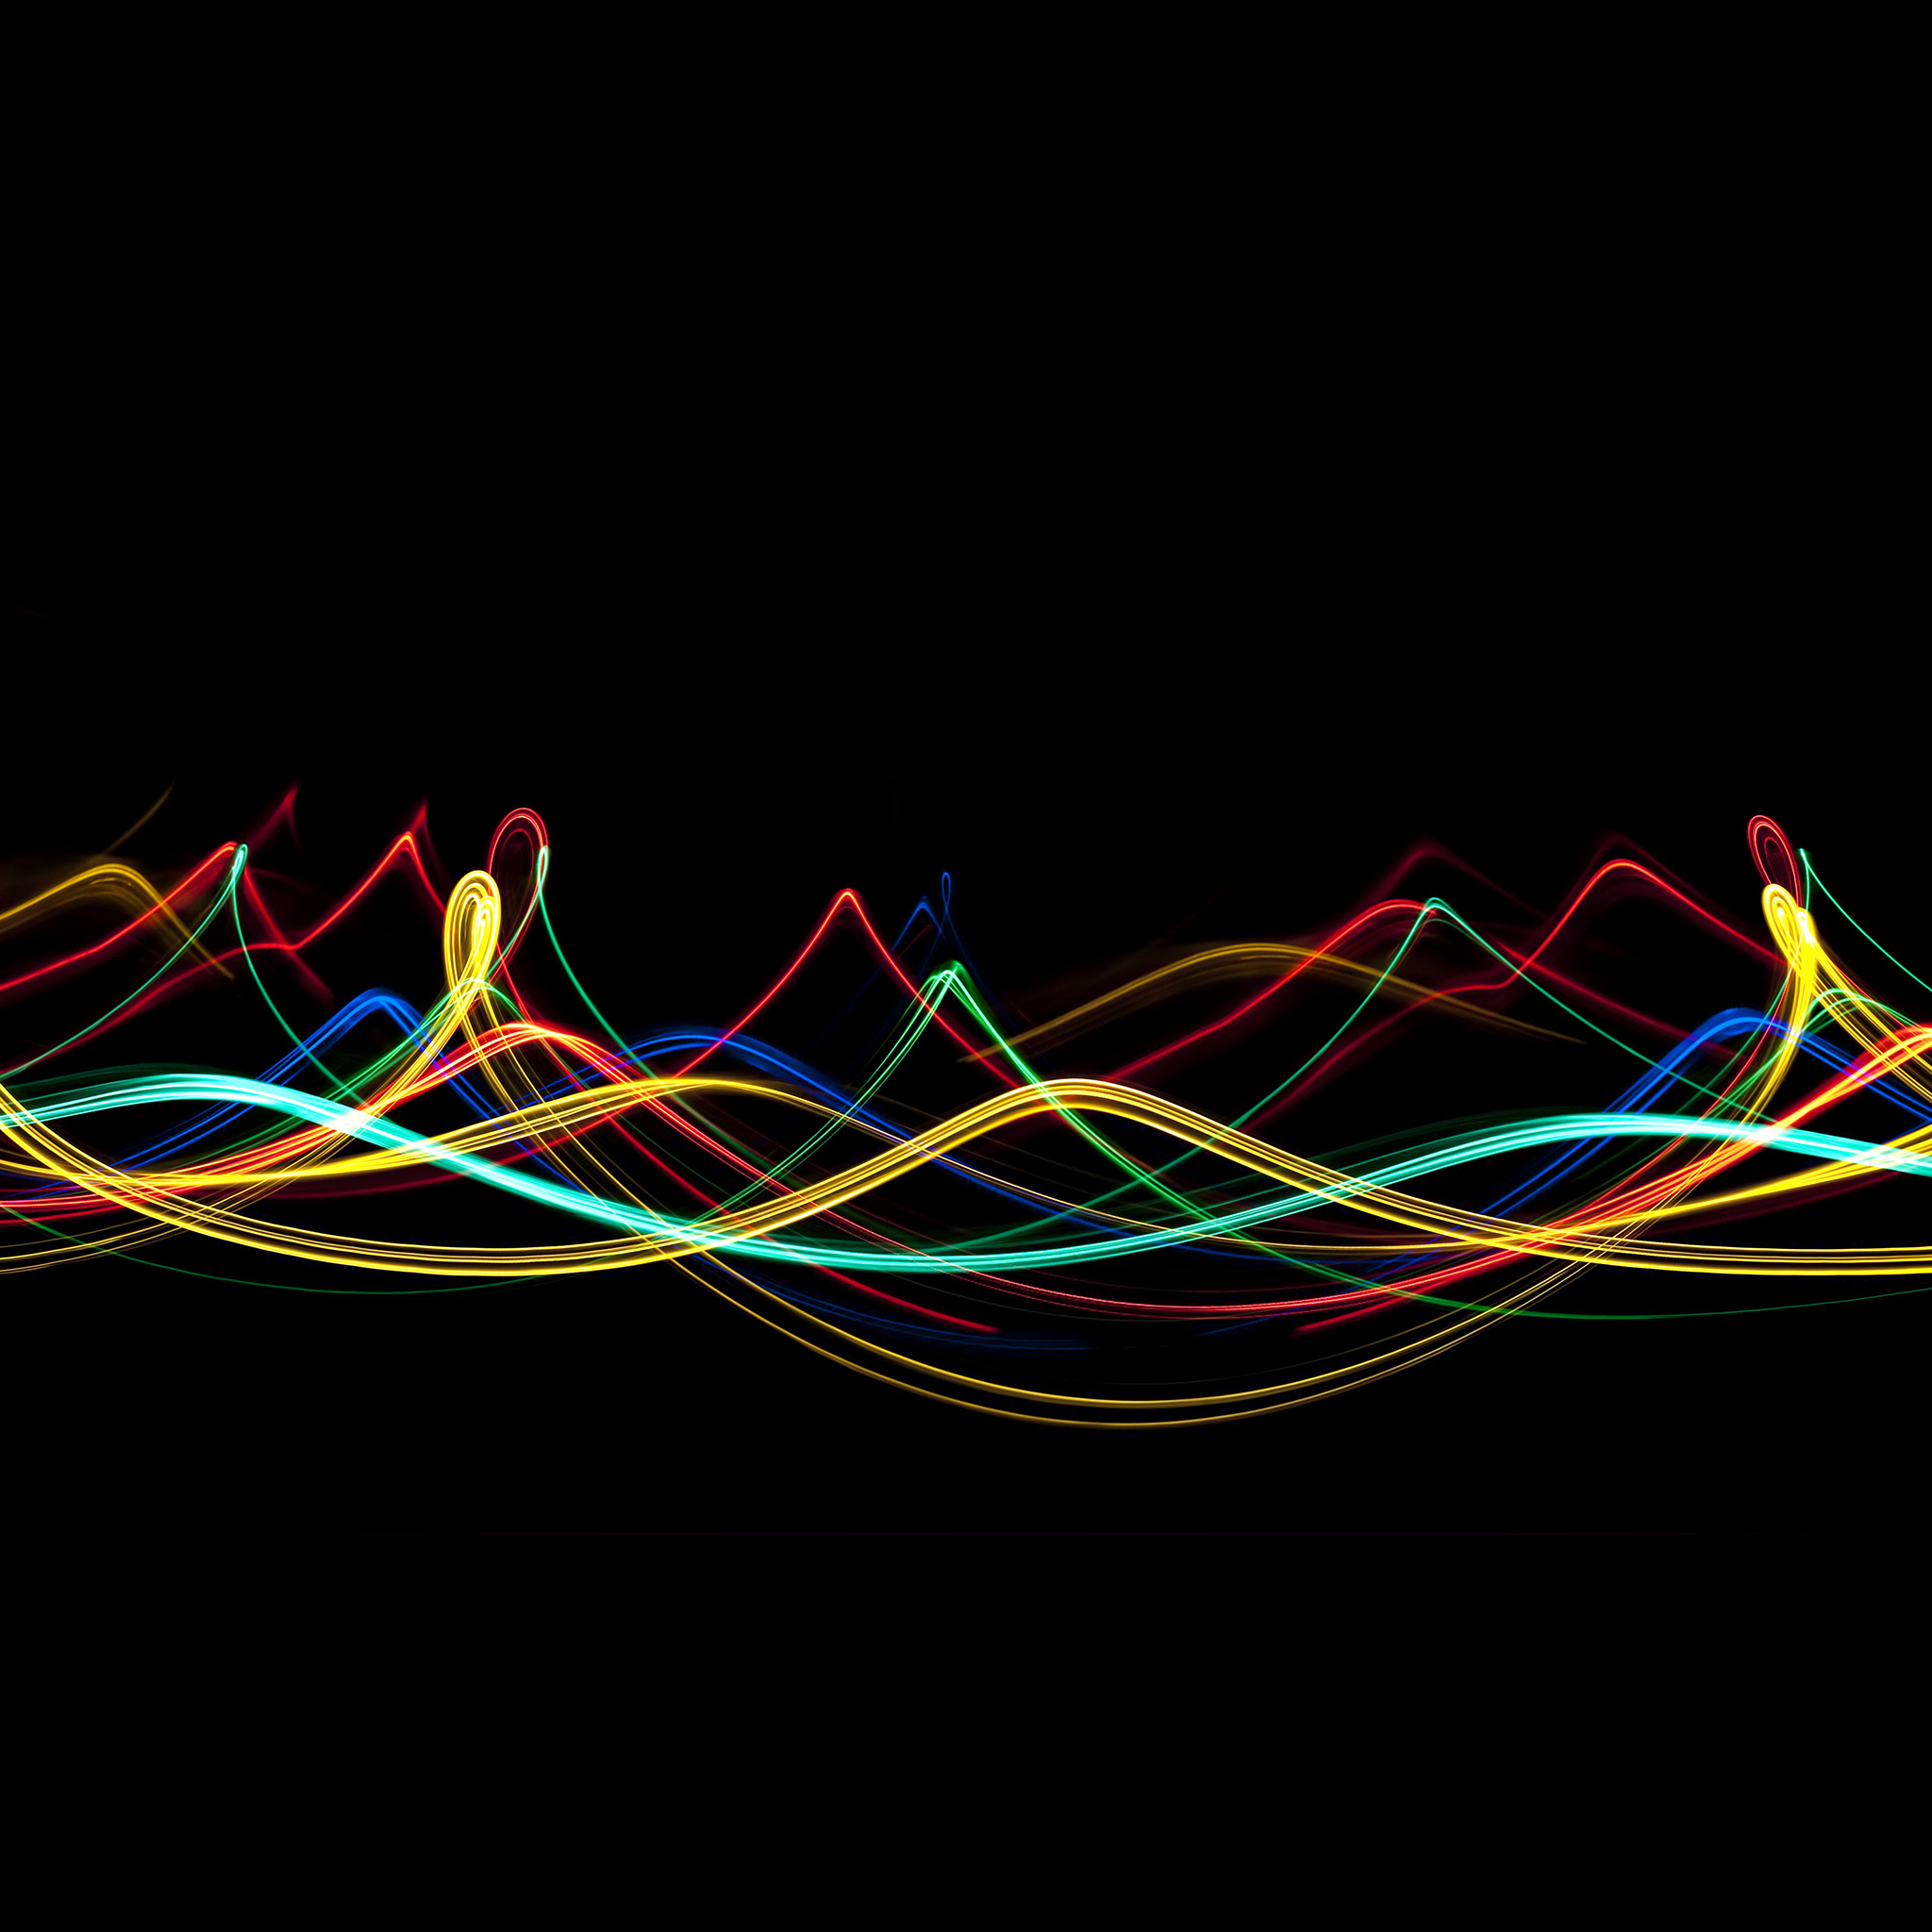 Android wallpaper. abstract curve lines rainbow pattern